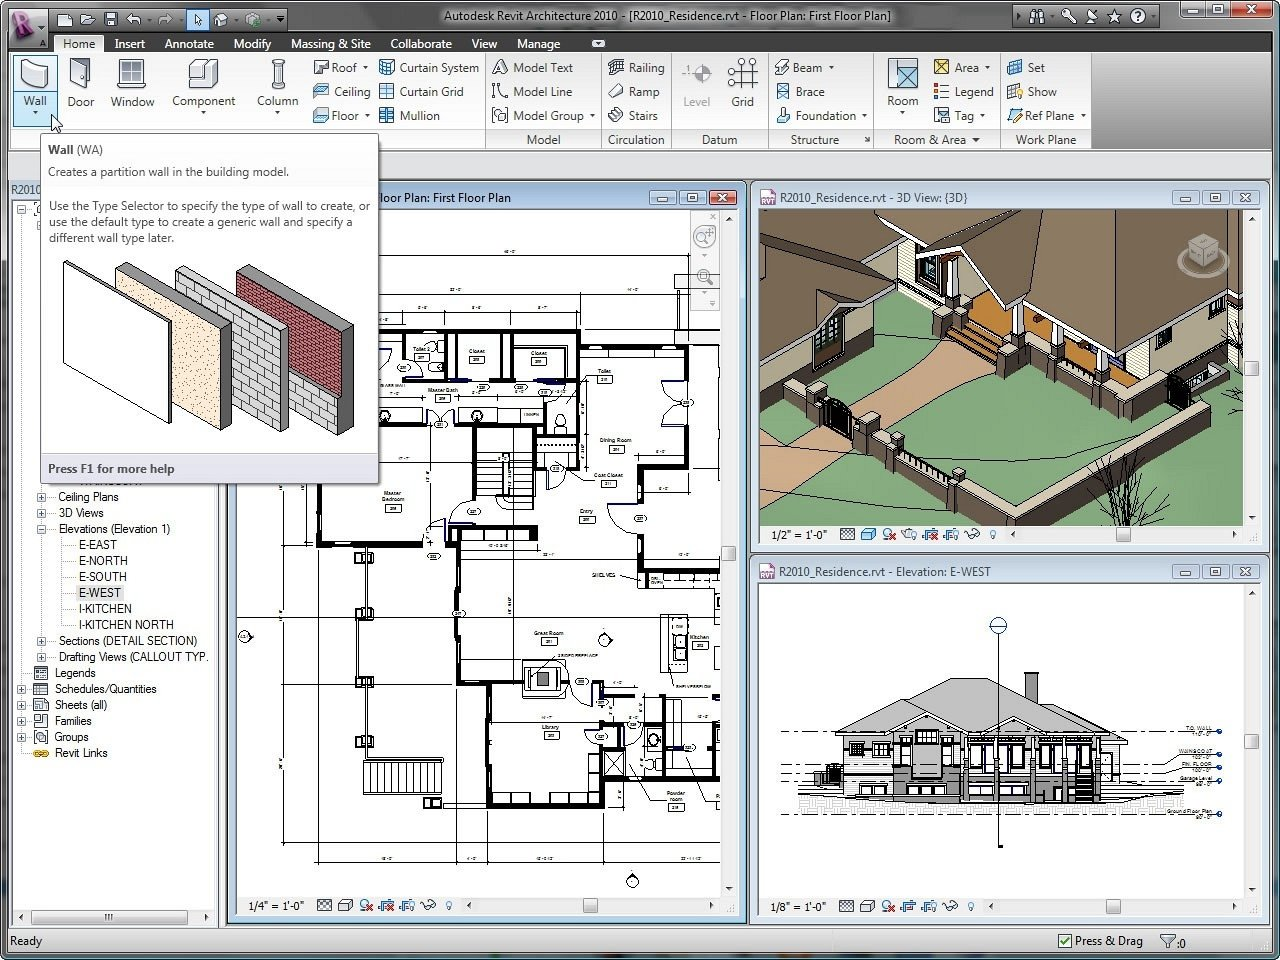 The user interface of the Revit software